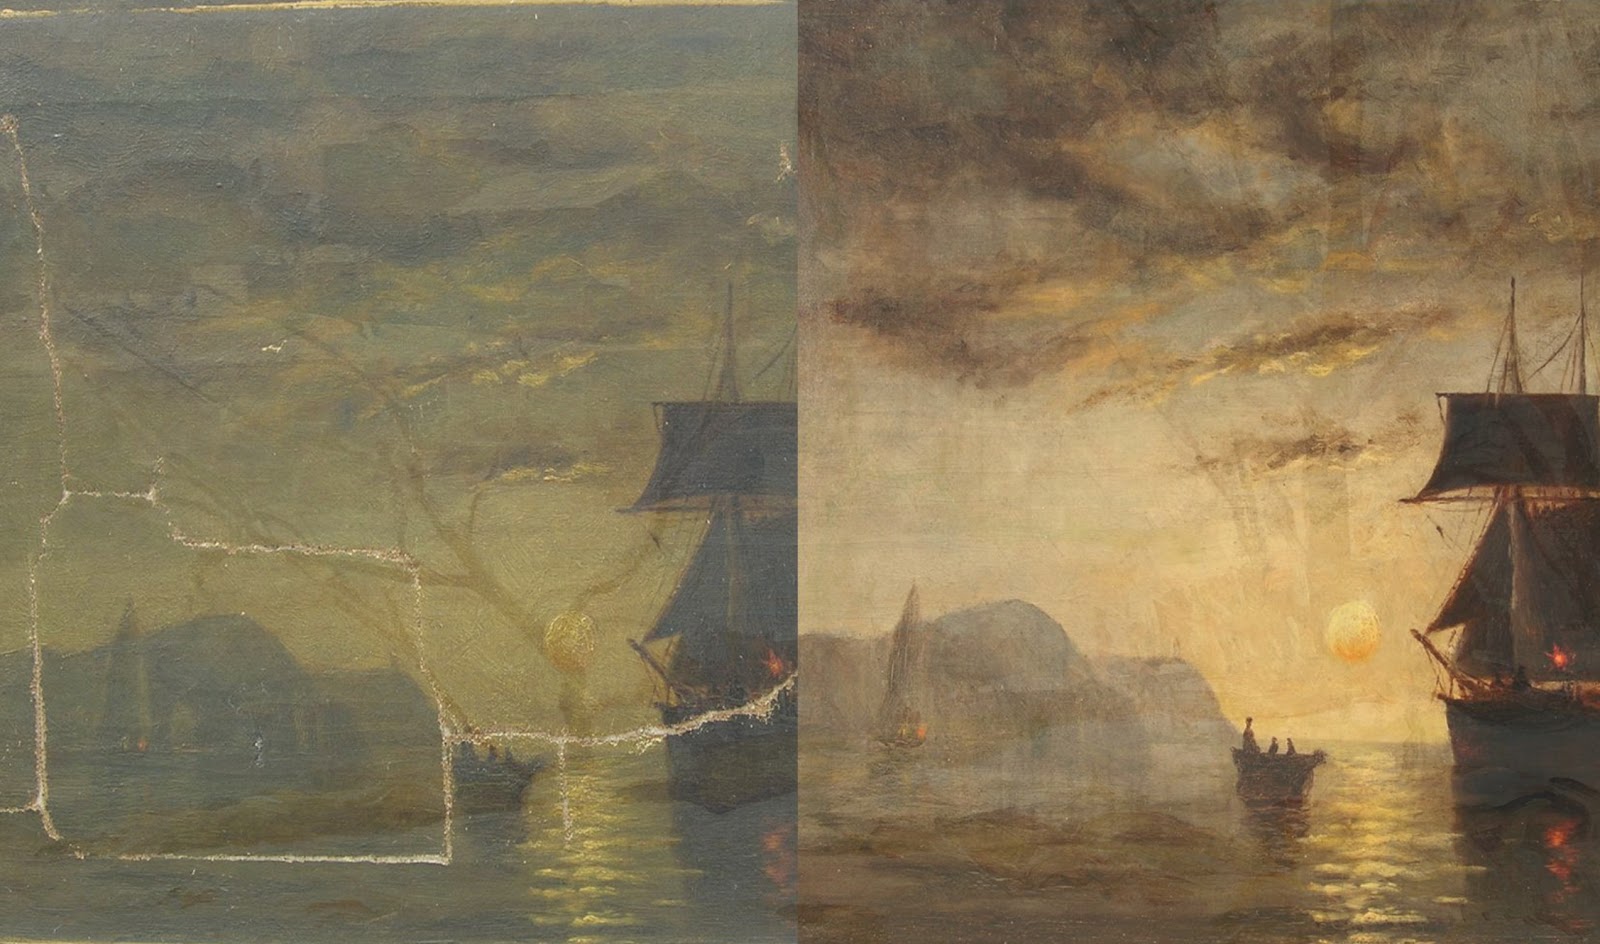 Extensive painting conservation, from the Gratz Gallery & Conservation Studio.